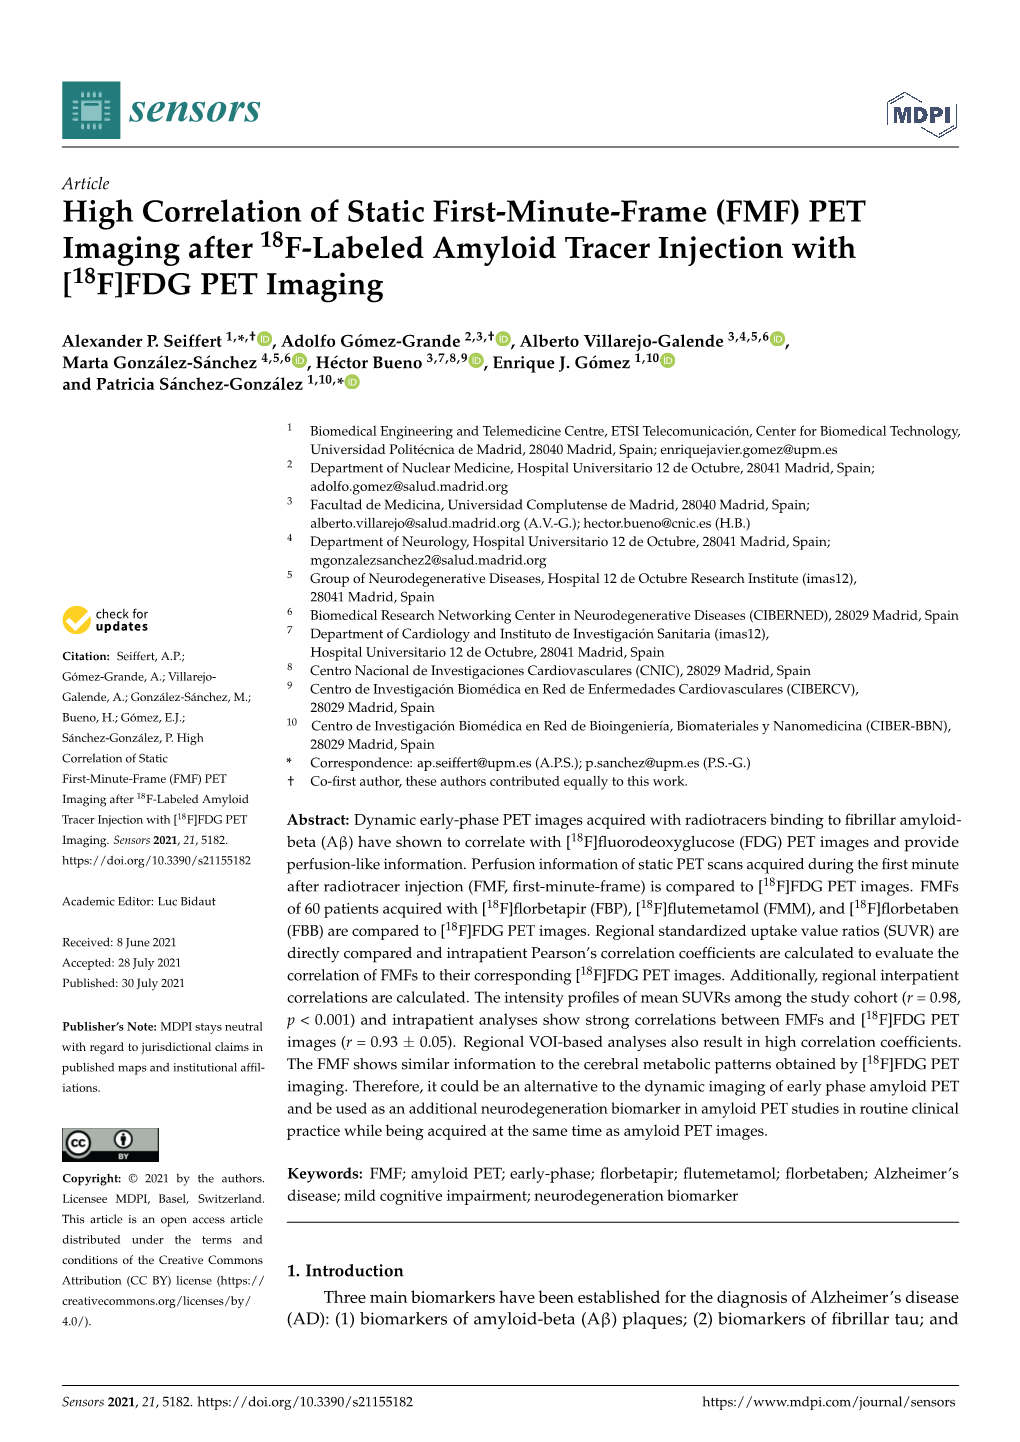 (FMF) PET Imaging After 18F-Labeled Amyloid Tracer Injection with [18F]FDG PET Imaging